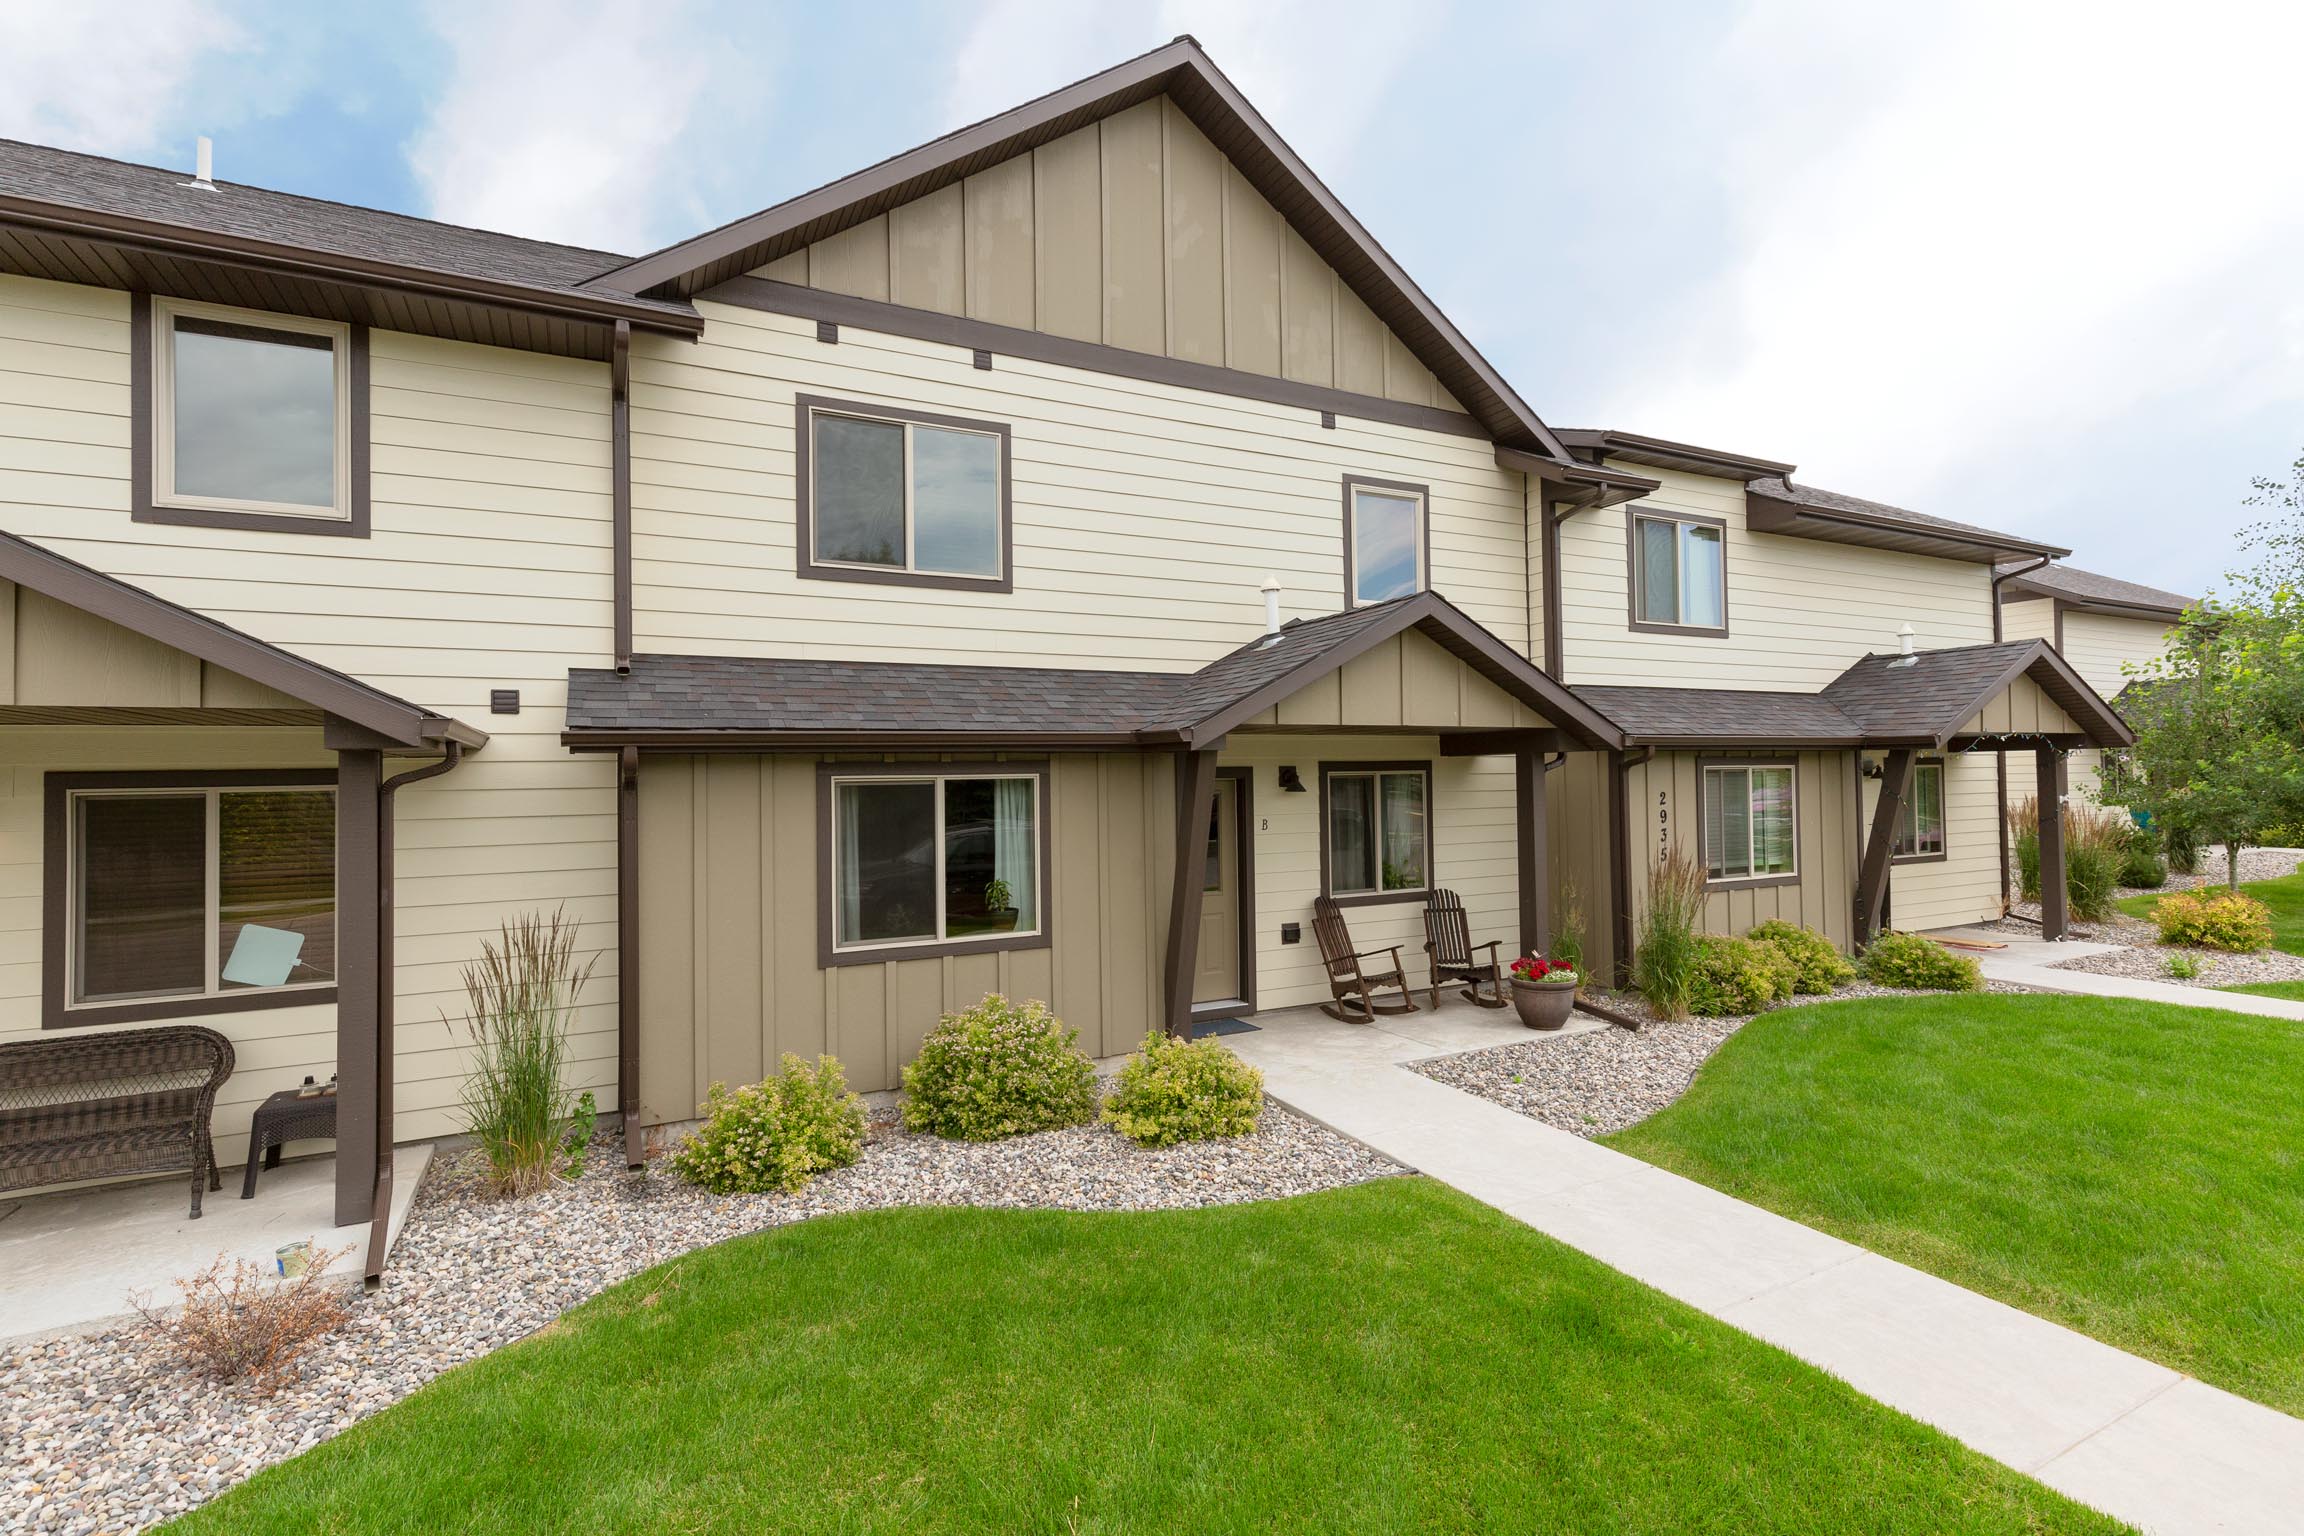 Investment Properties for sale in Bozeman Montana